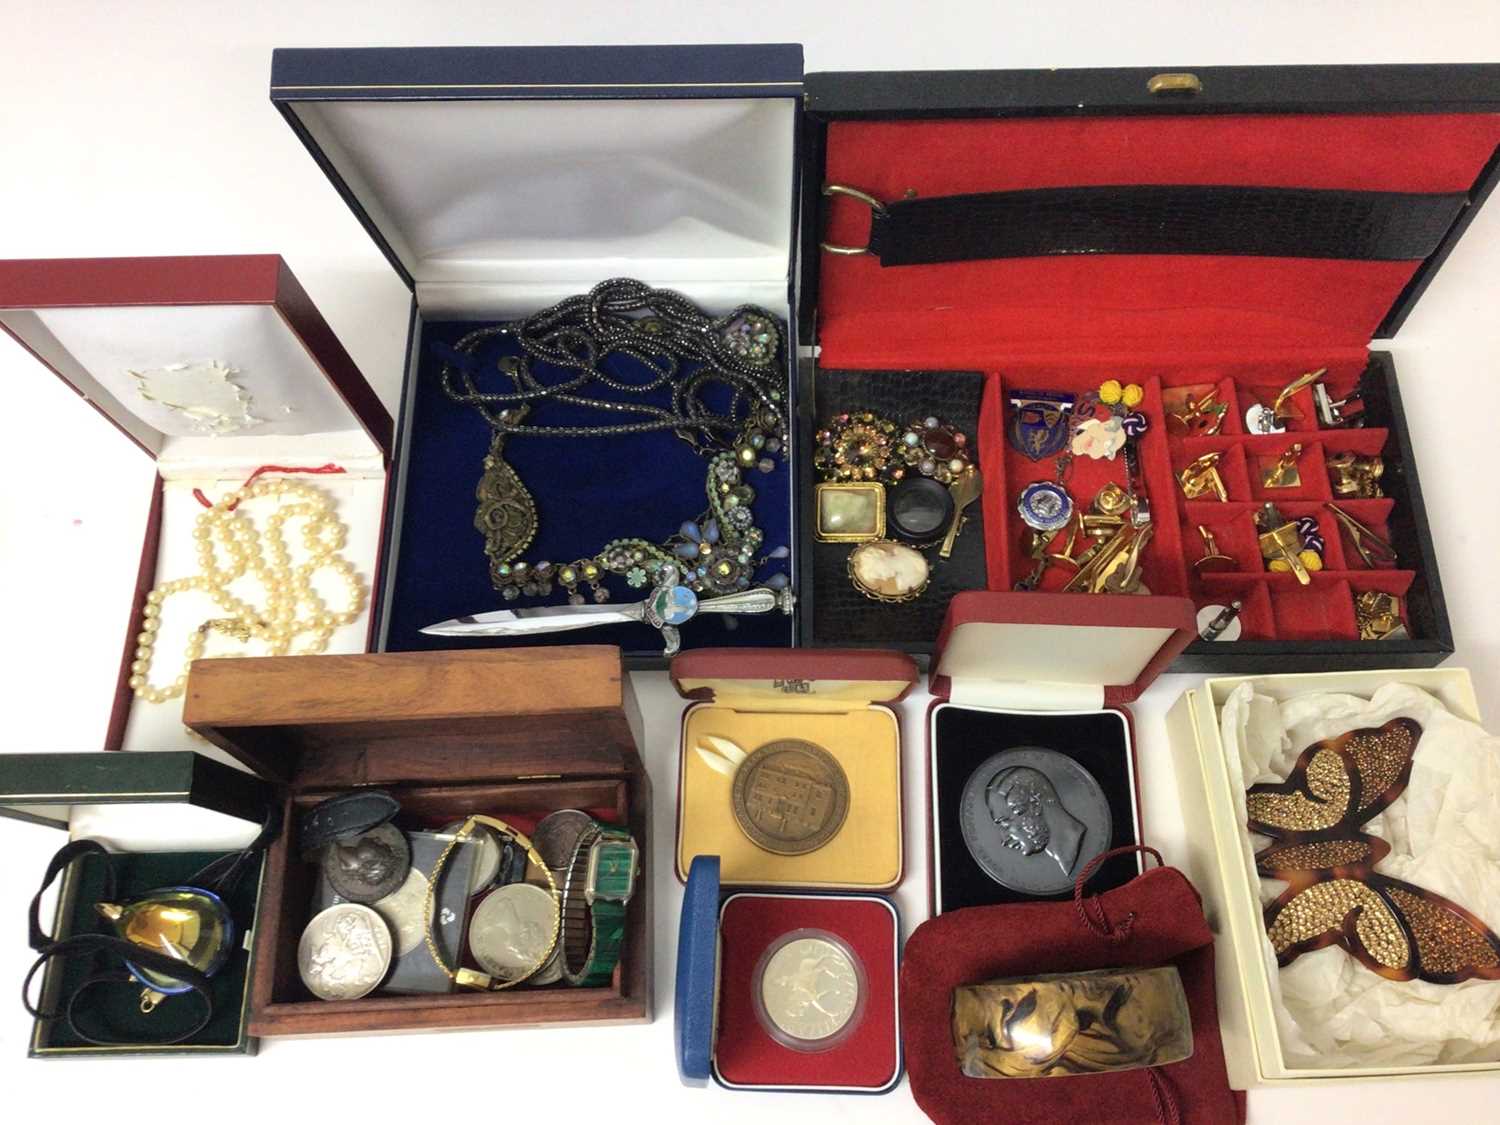 Lot 341 - Group of costume jewellery and bijouterie including various cufflinks, brooches, wristwatches, coins and medallions